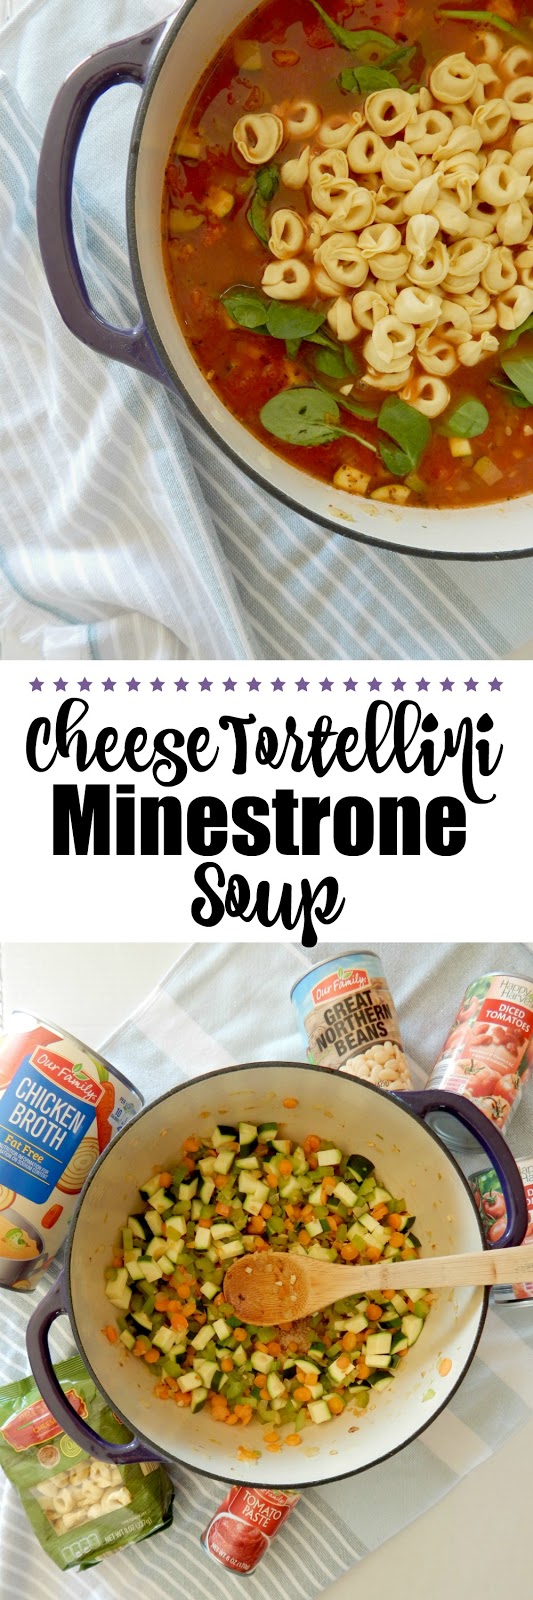 Cheese Tortellini Minestrone Soup...a delicious, healthy and hearty soup!  Full of vegetables, stock, tomatoes and of course cheese tortellini.  Everyone loves this winter/spring meal. (sweetandsavoryfood.com)